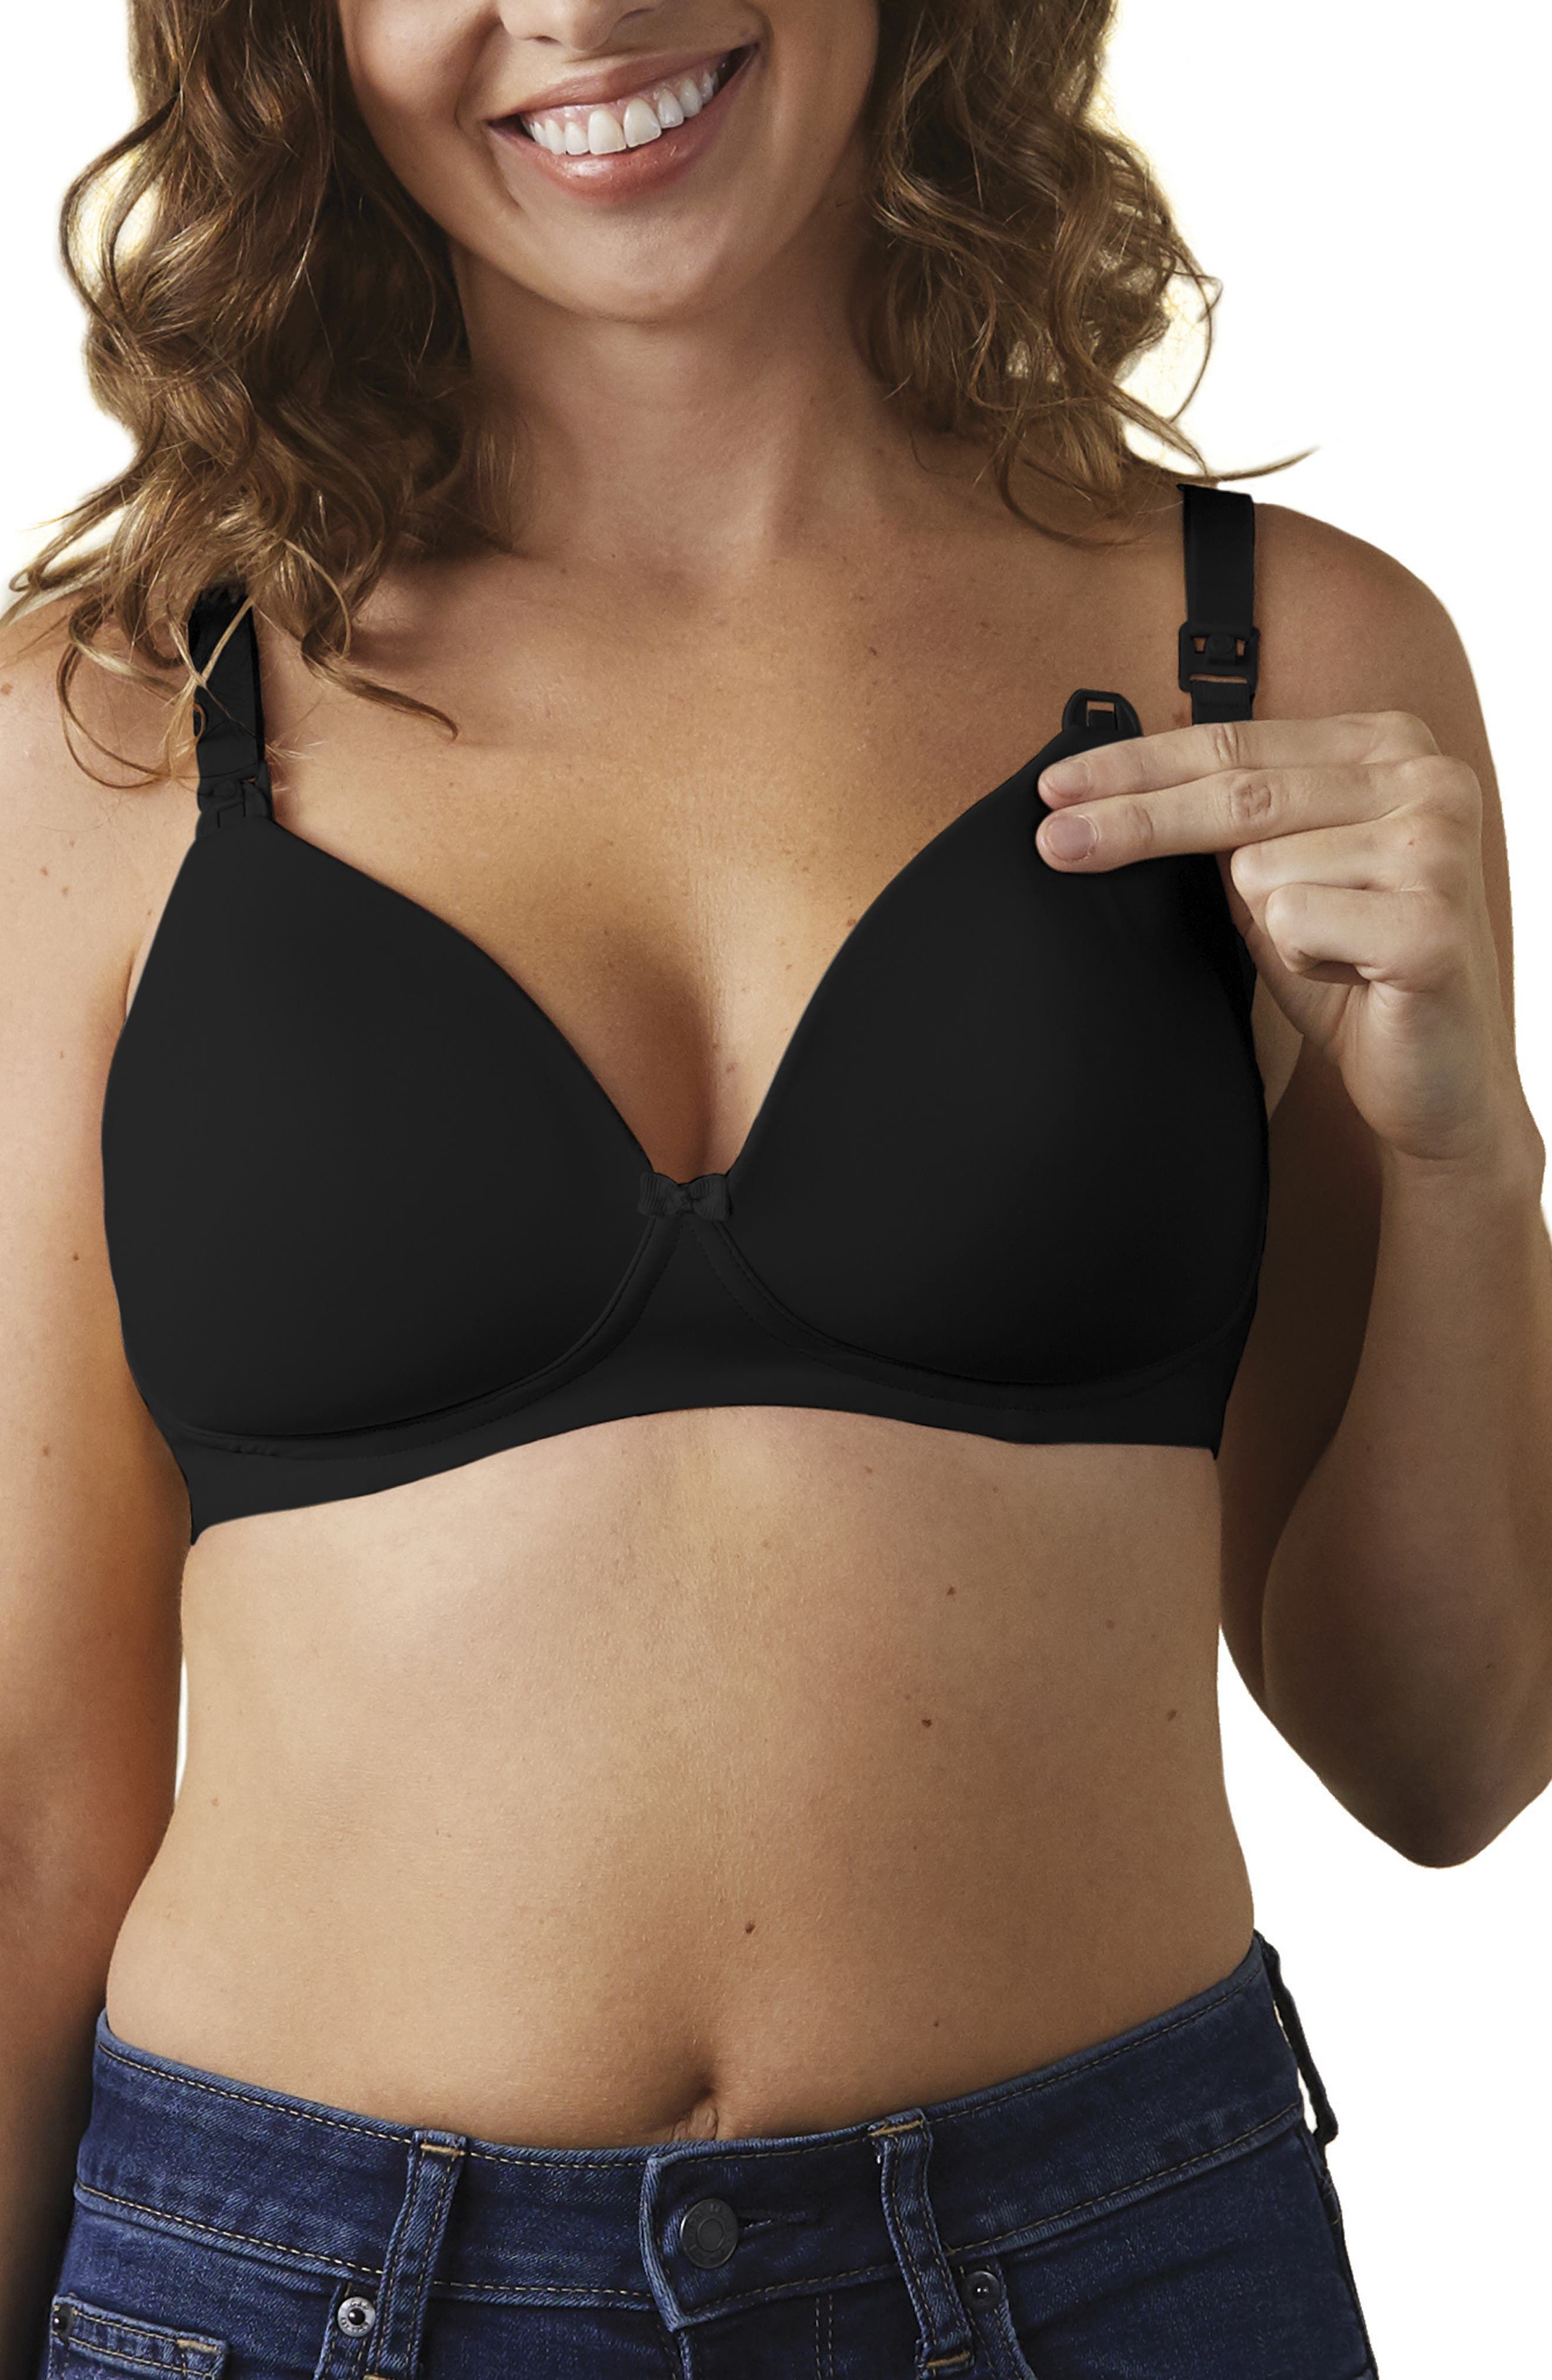 Nursing bras for large breasts - Baby Care Mag